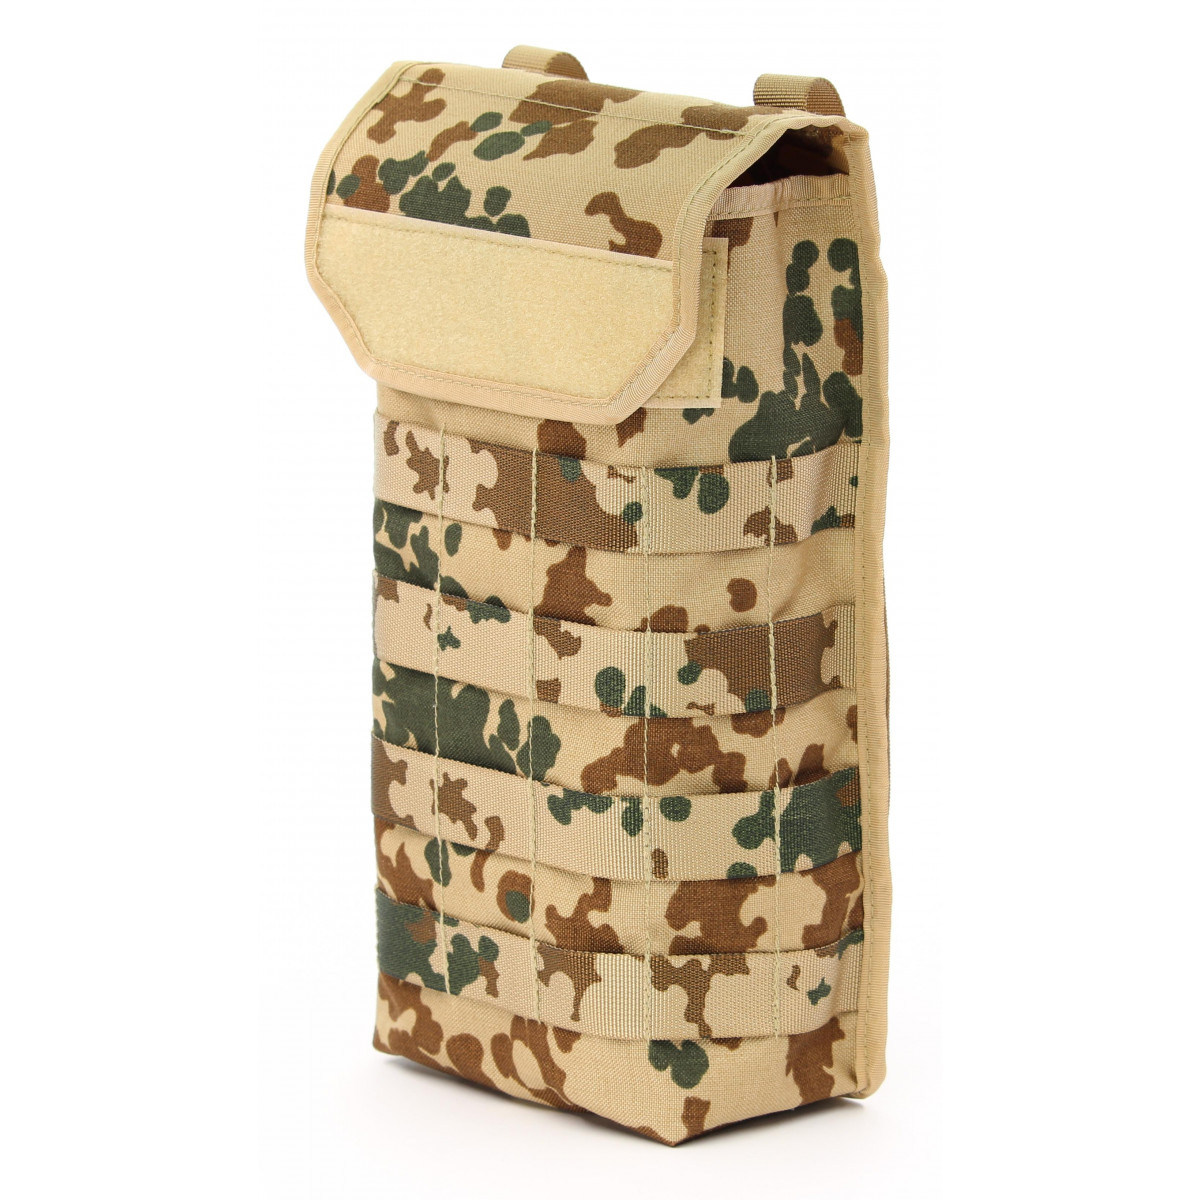 Hydrations Carrier 2 liters Molle pouch for water bladders color tropical camouflage